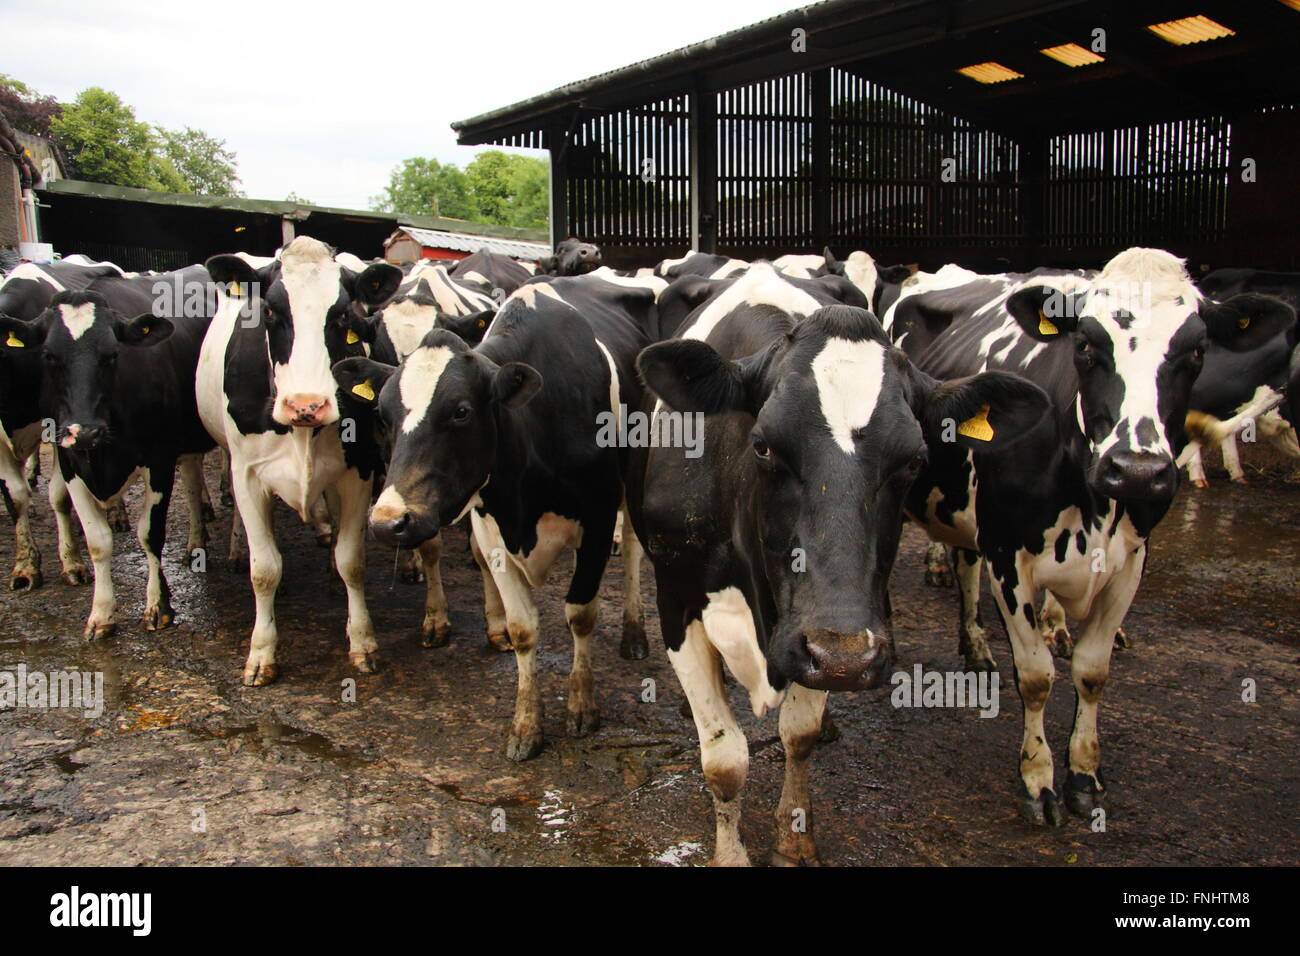 A herd of dairy cows in the yard of a farm in the Peak District National Park, England UK Stock Photo